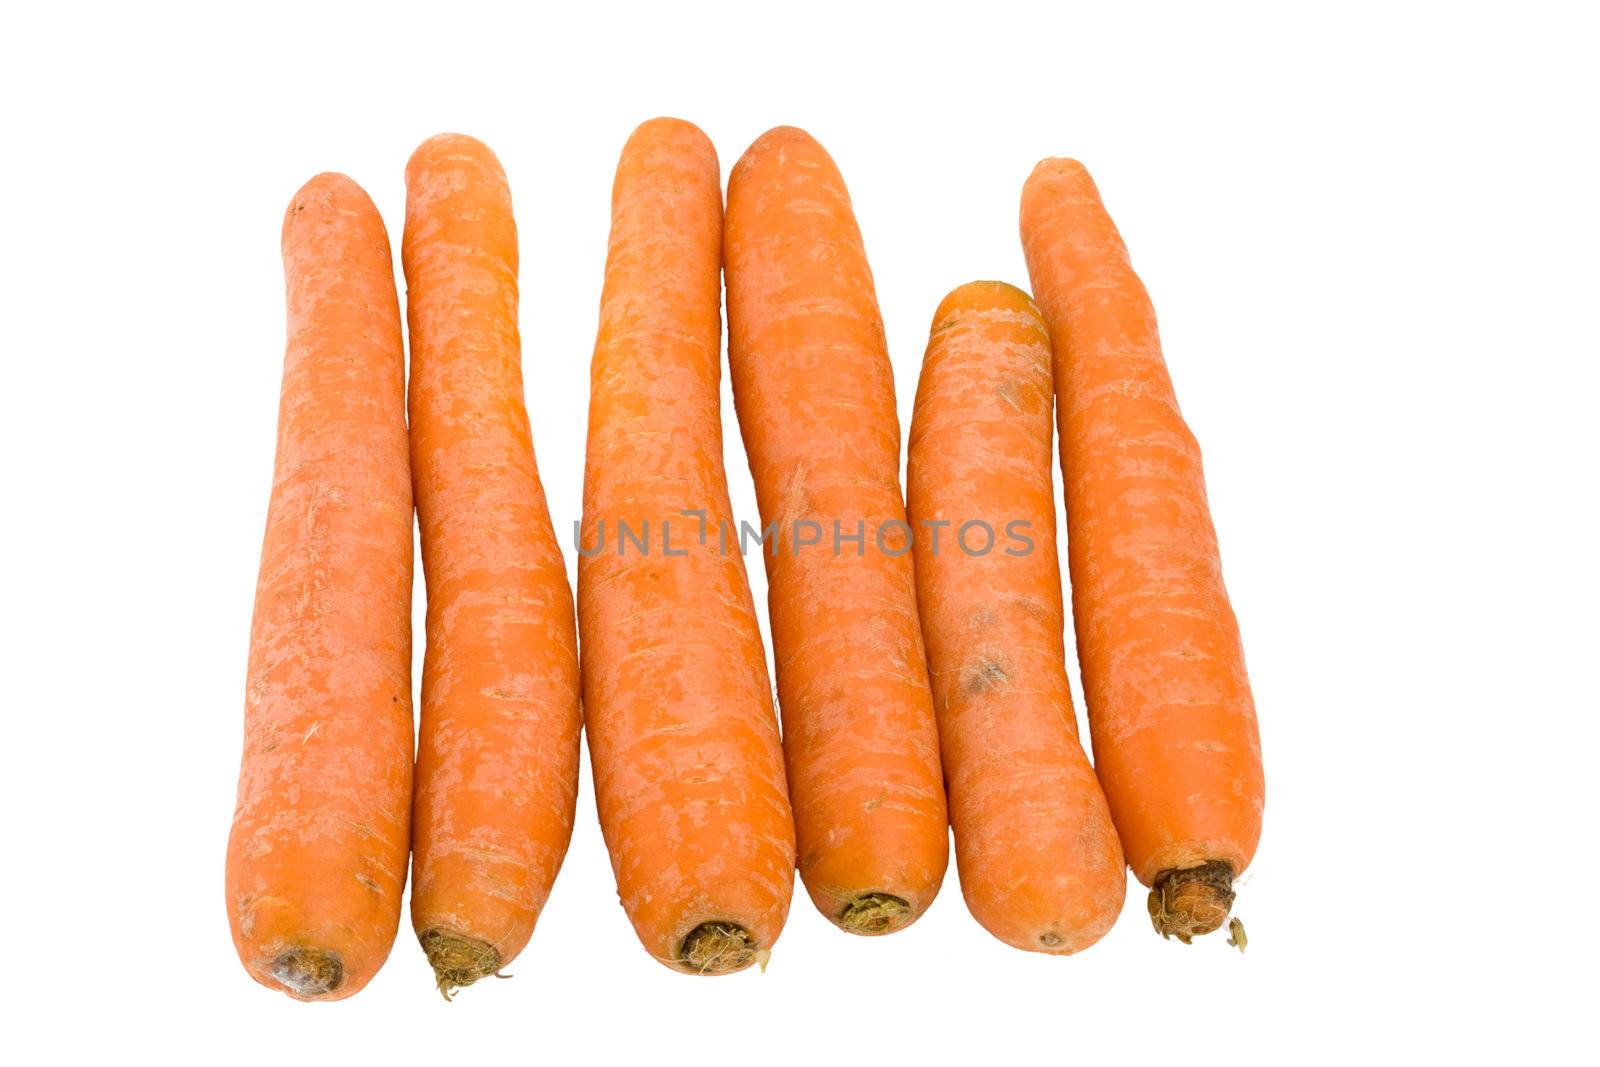 six carrots over white background by bernjuer